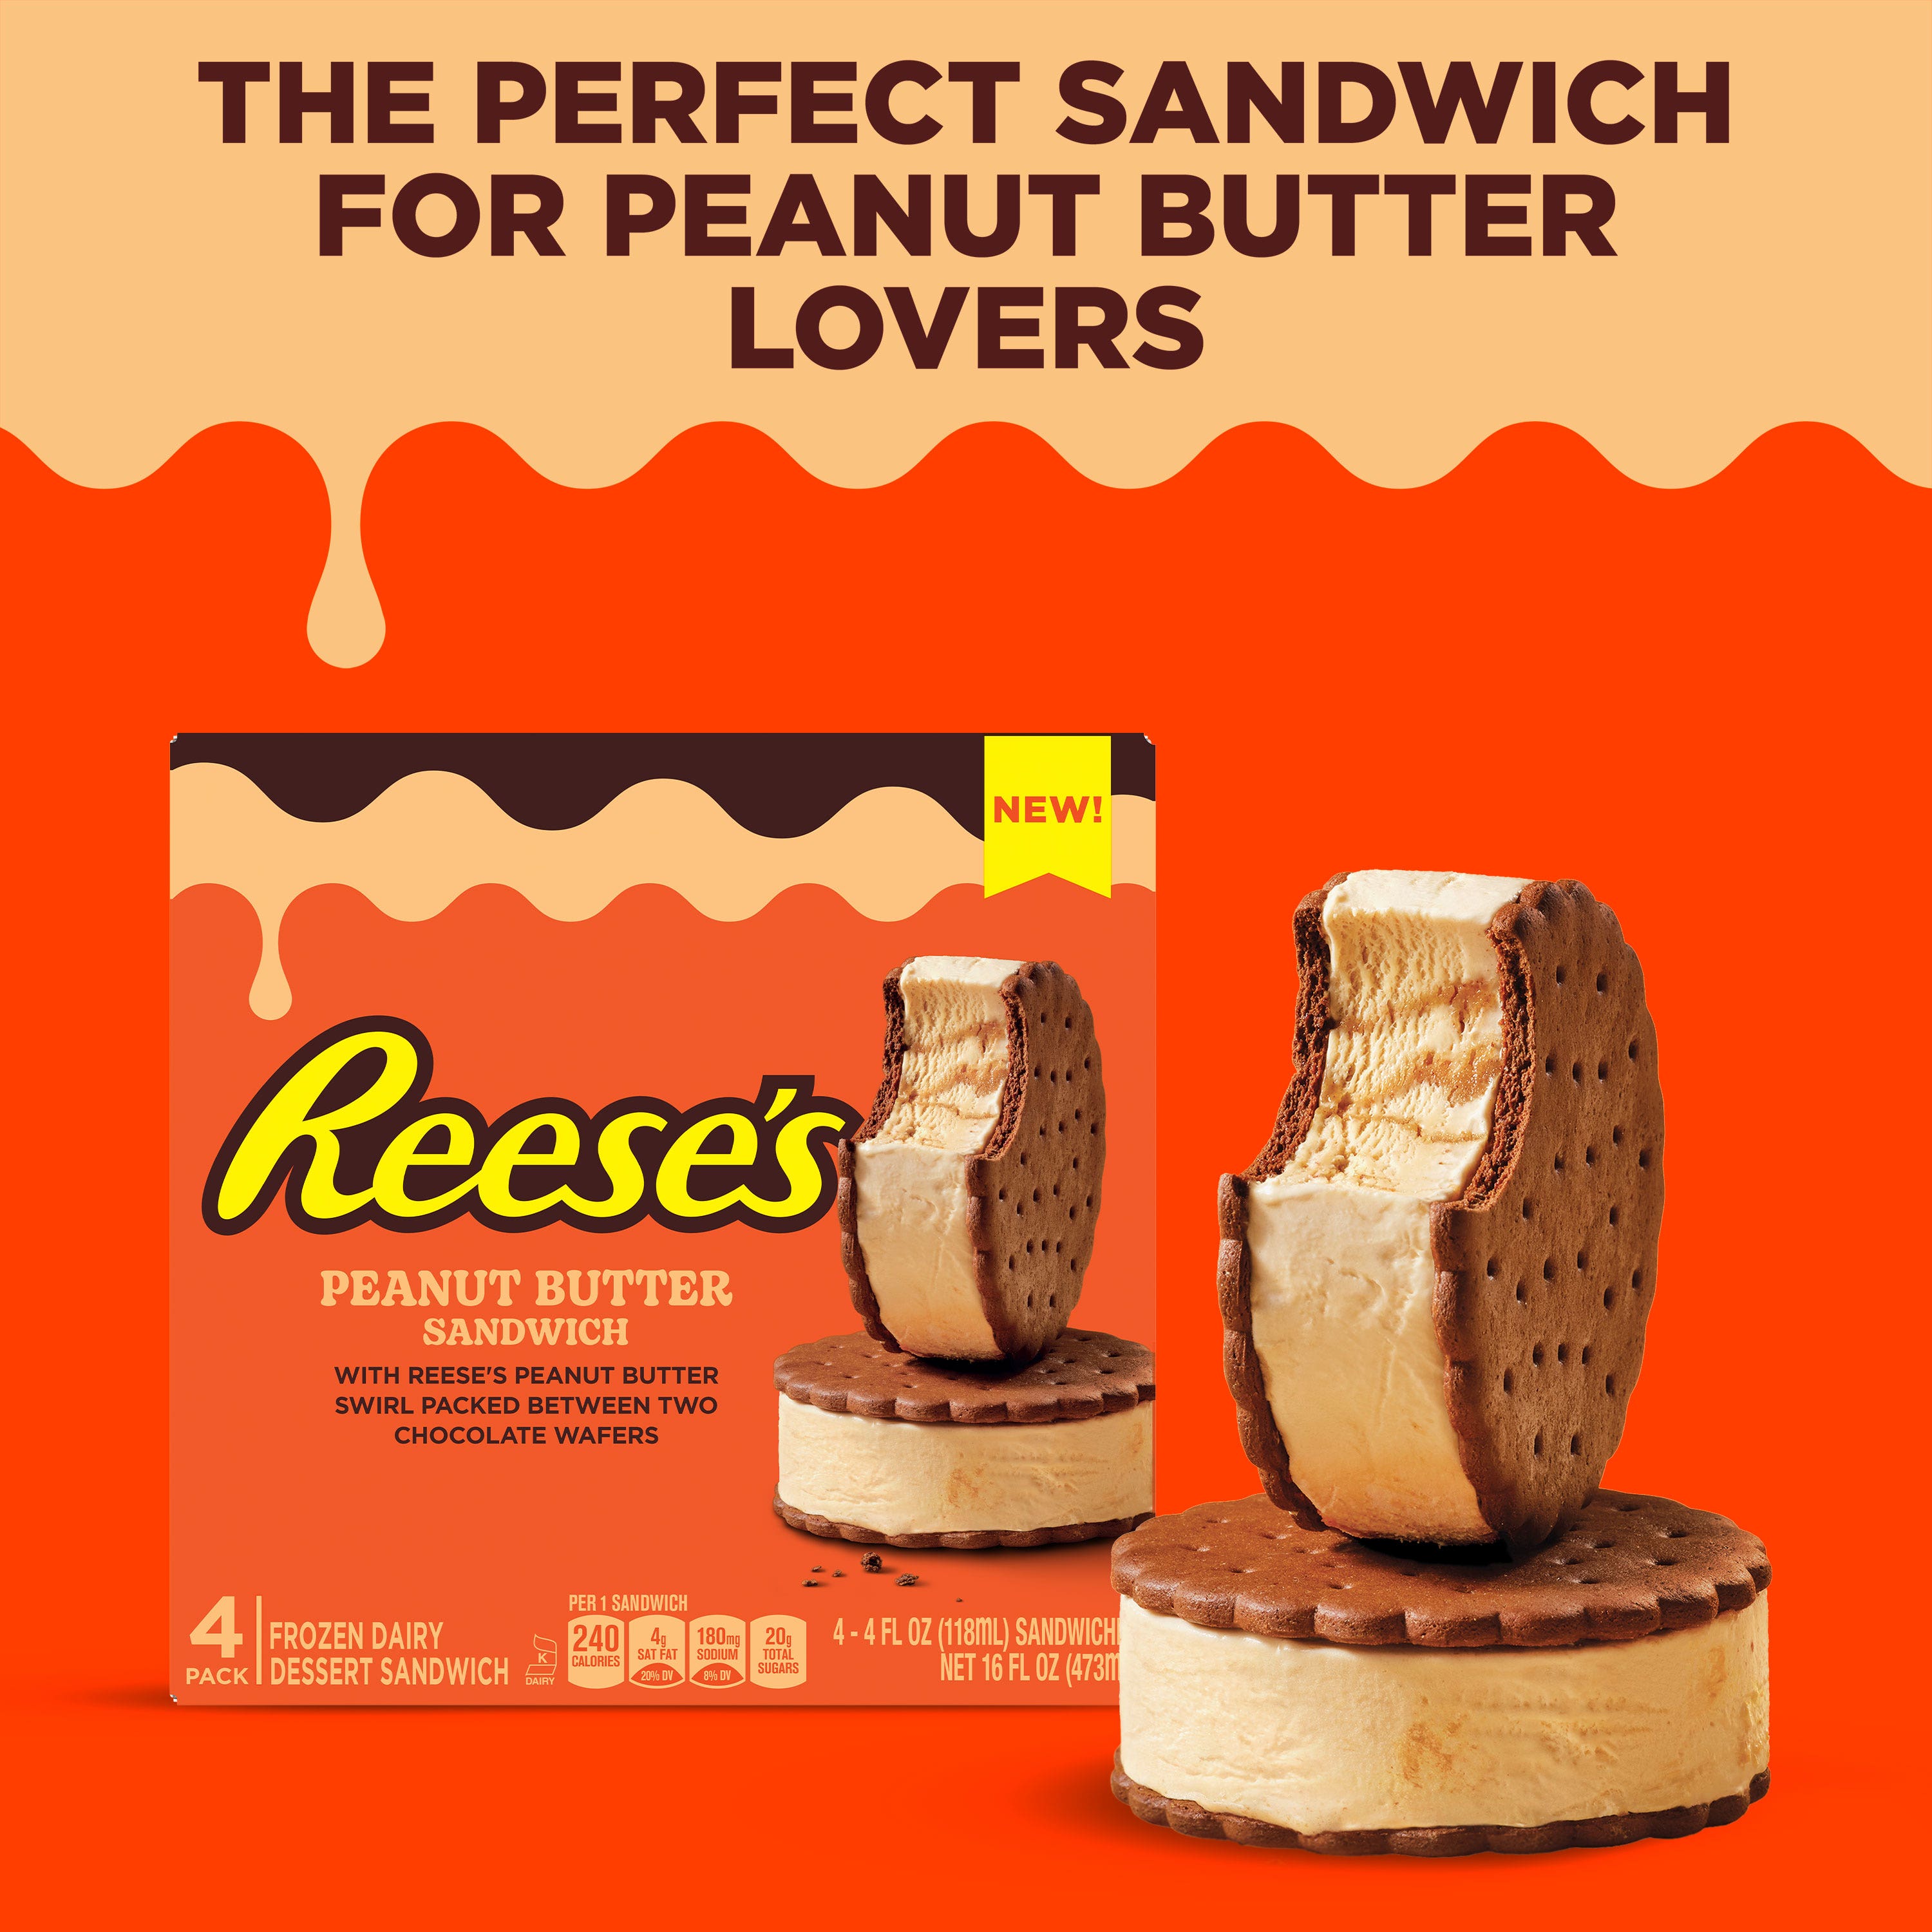 REESE'S Chocolate Peanut Butter Frozen Dairy Dessert Sandwiches, 4 oz, 4 count box - Front of Package